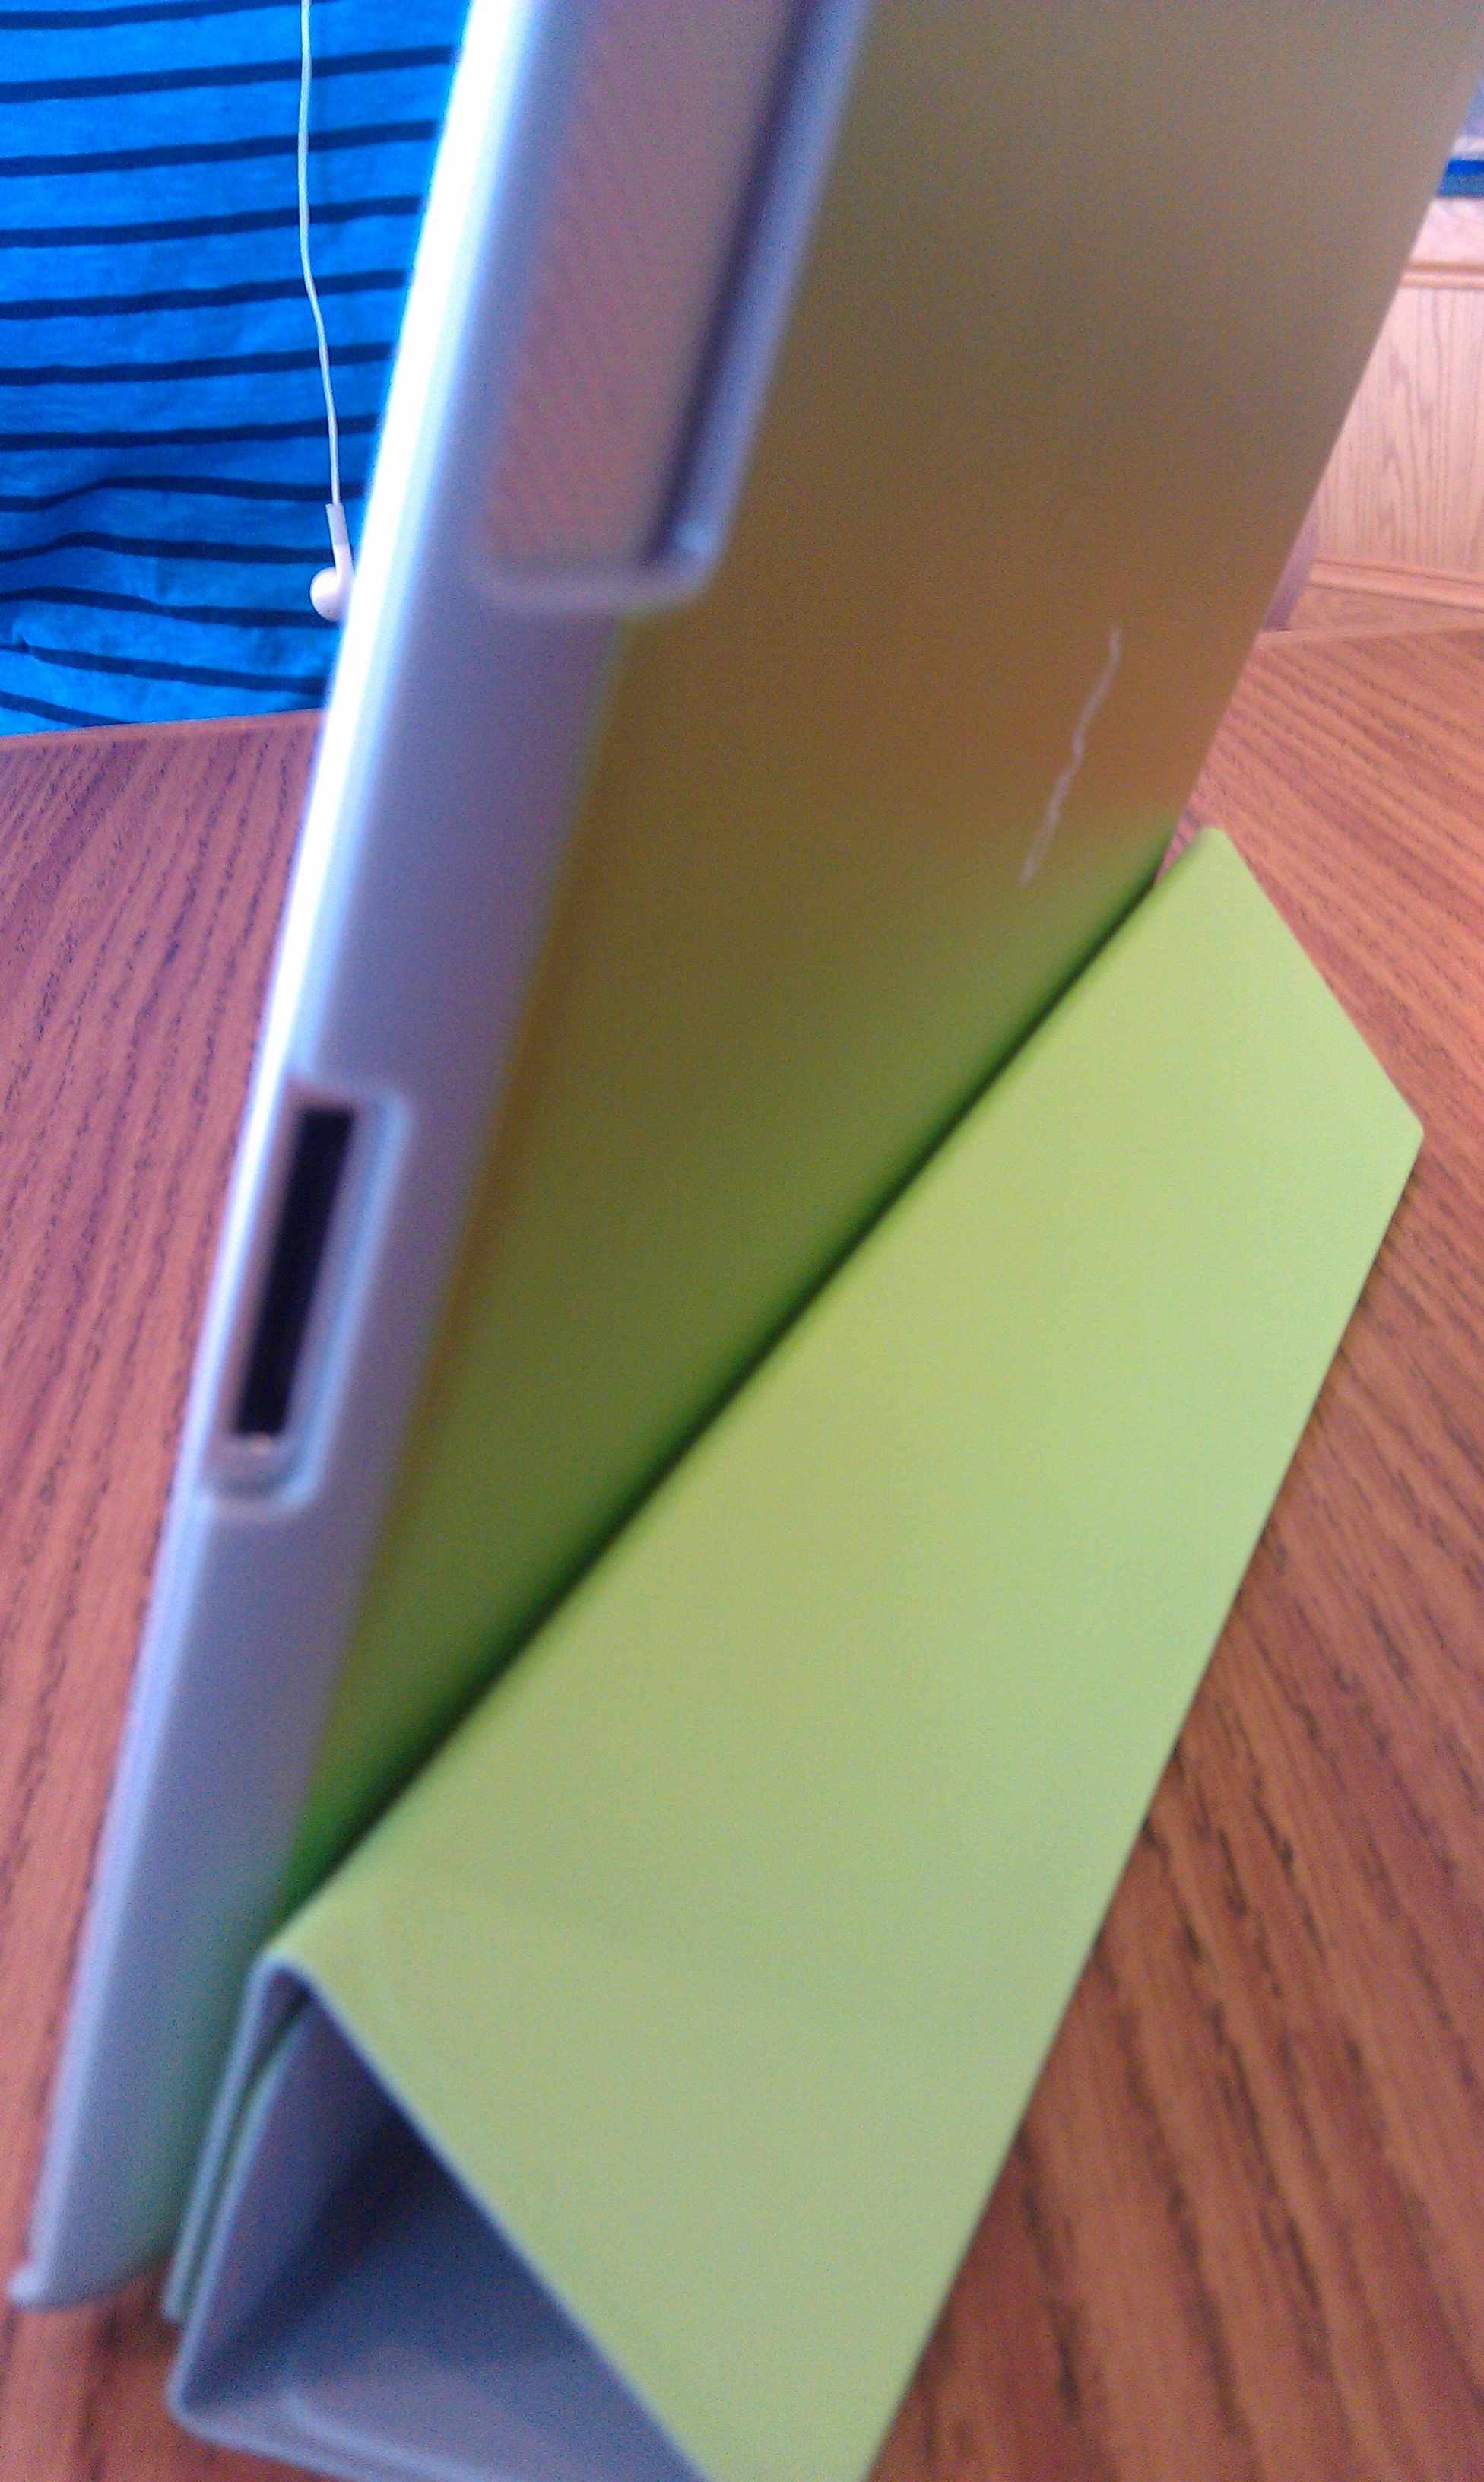 AViiQ Smart Case protects the back while using the iPad 2 Smart Cover